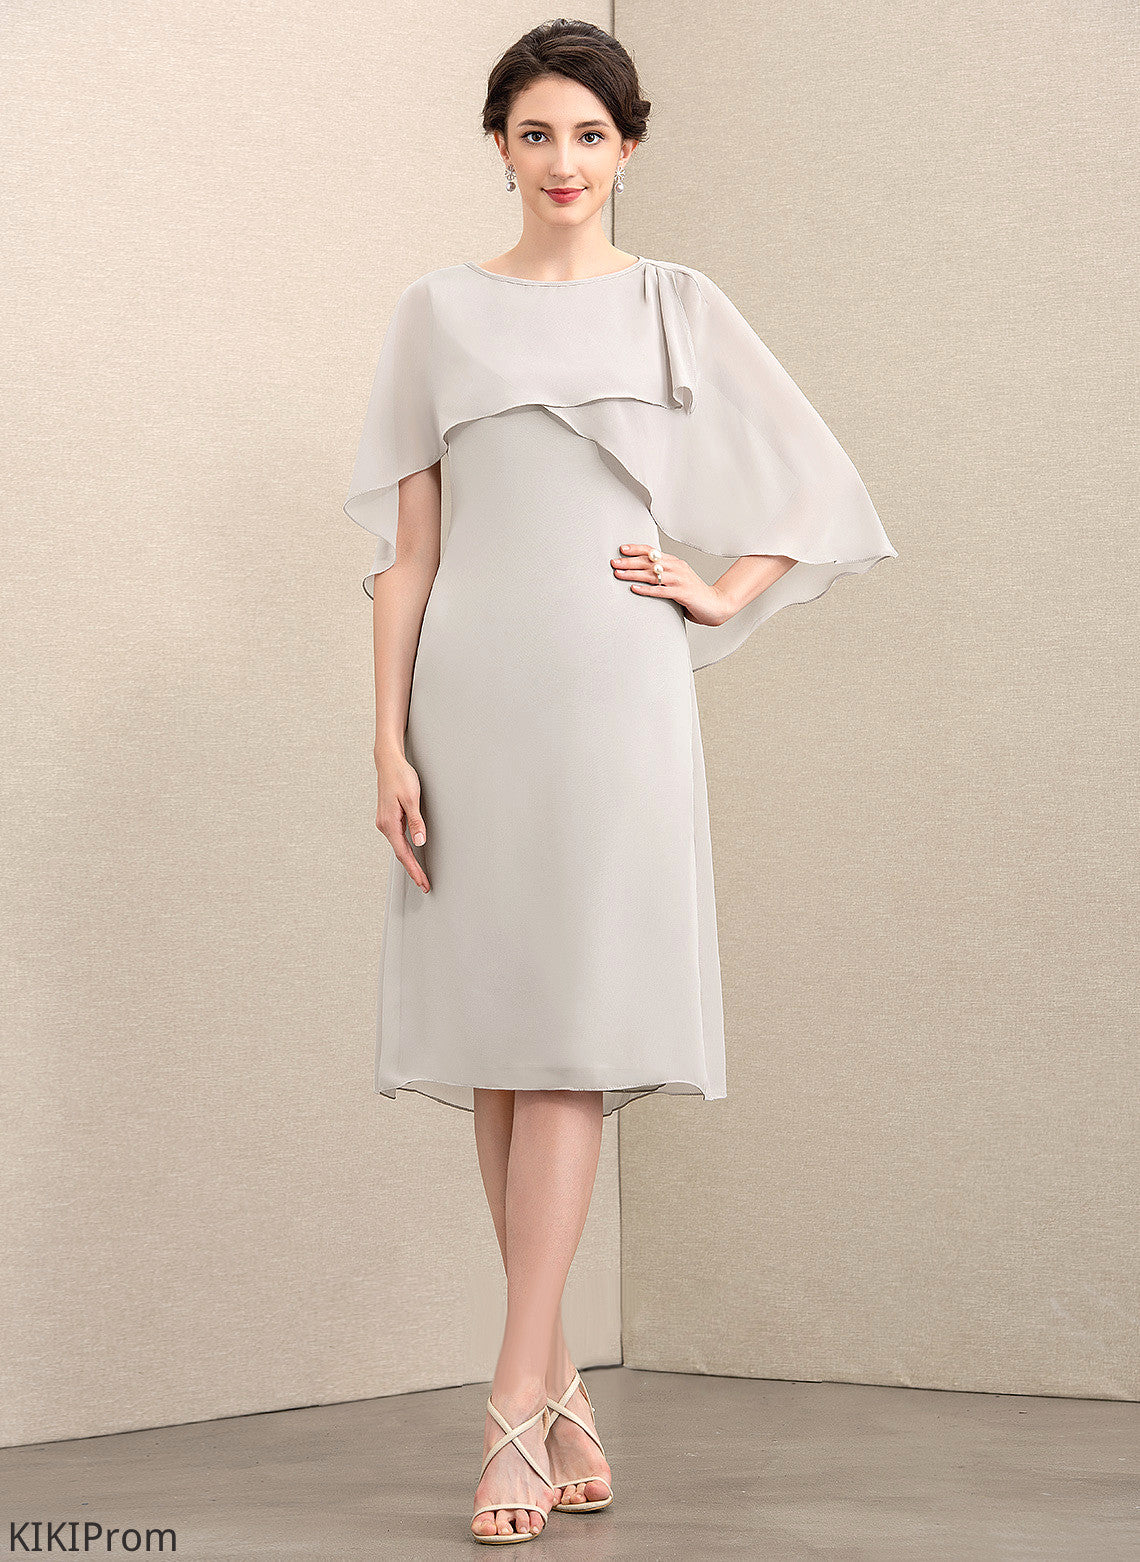 Dress Chiffon Bride the A-Line Nita Mother of Knee-Length Mother of the Bride Dresses Neck Scoop